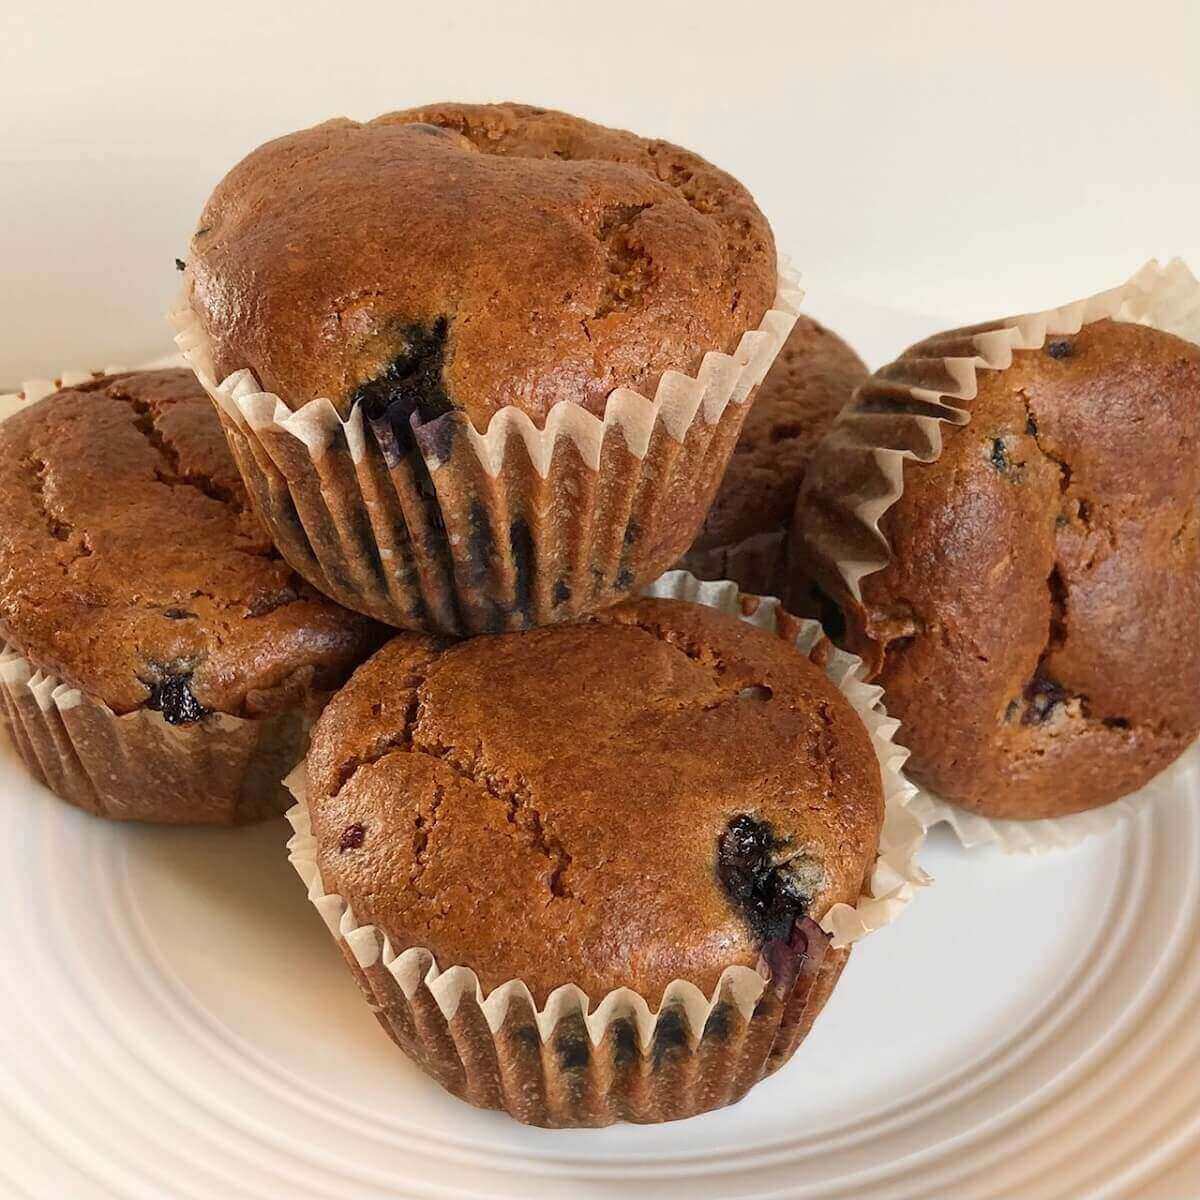 Five muffins displayed on a plate.